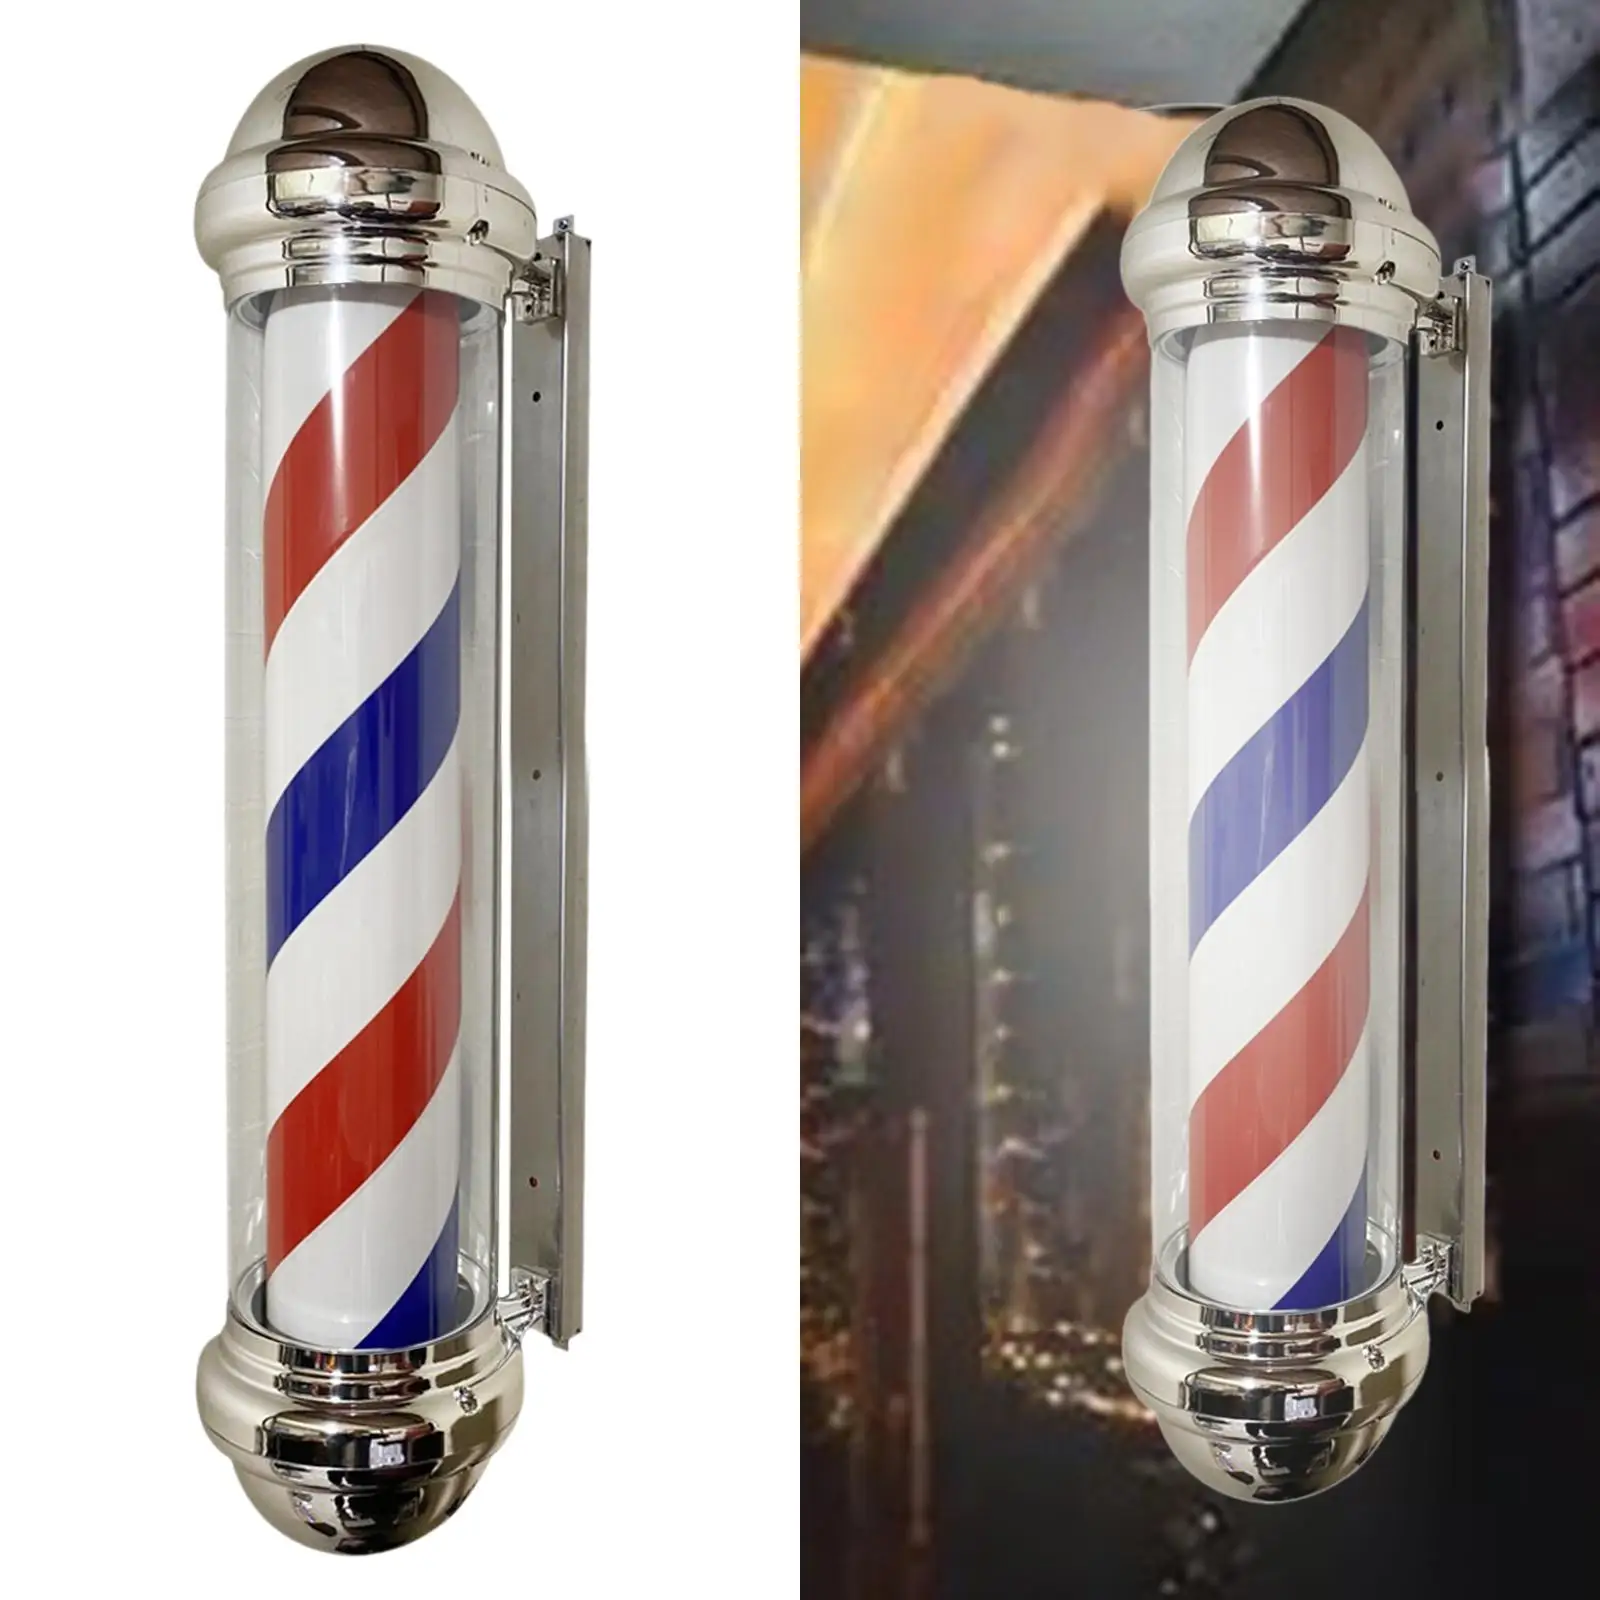 Barber Shop Pole Light Rotating Hair Salon Shop Sign Stripe Wall Mounted Vintage Style LED Lamp for Party Entrance